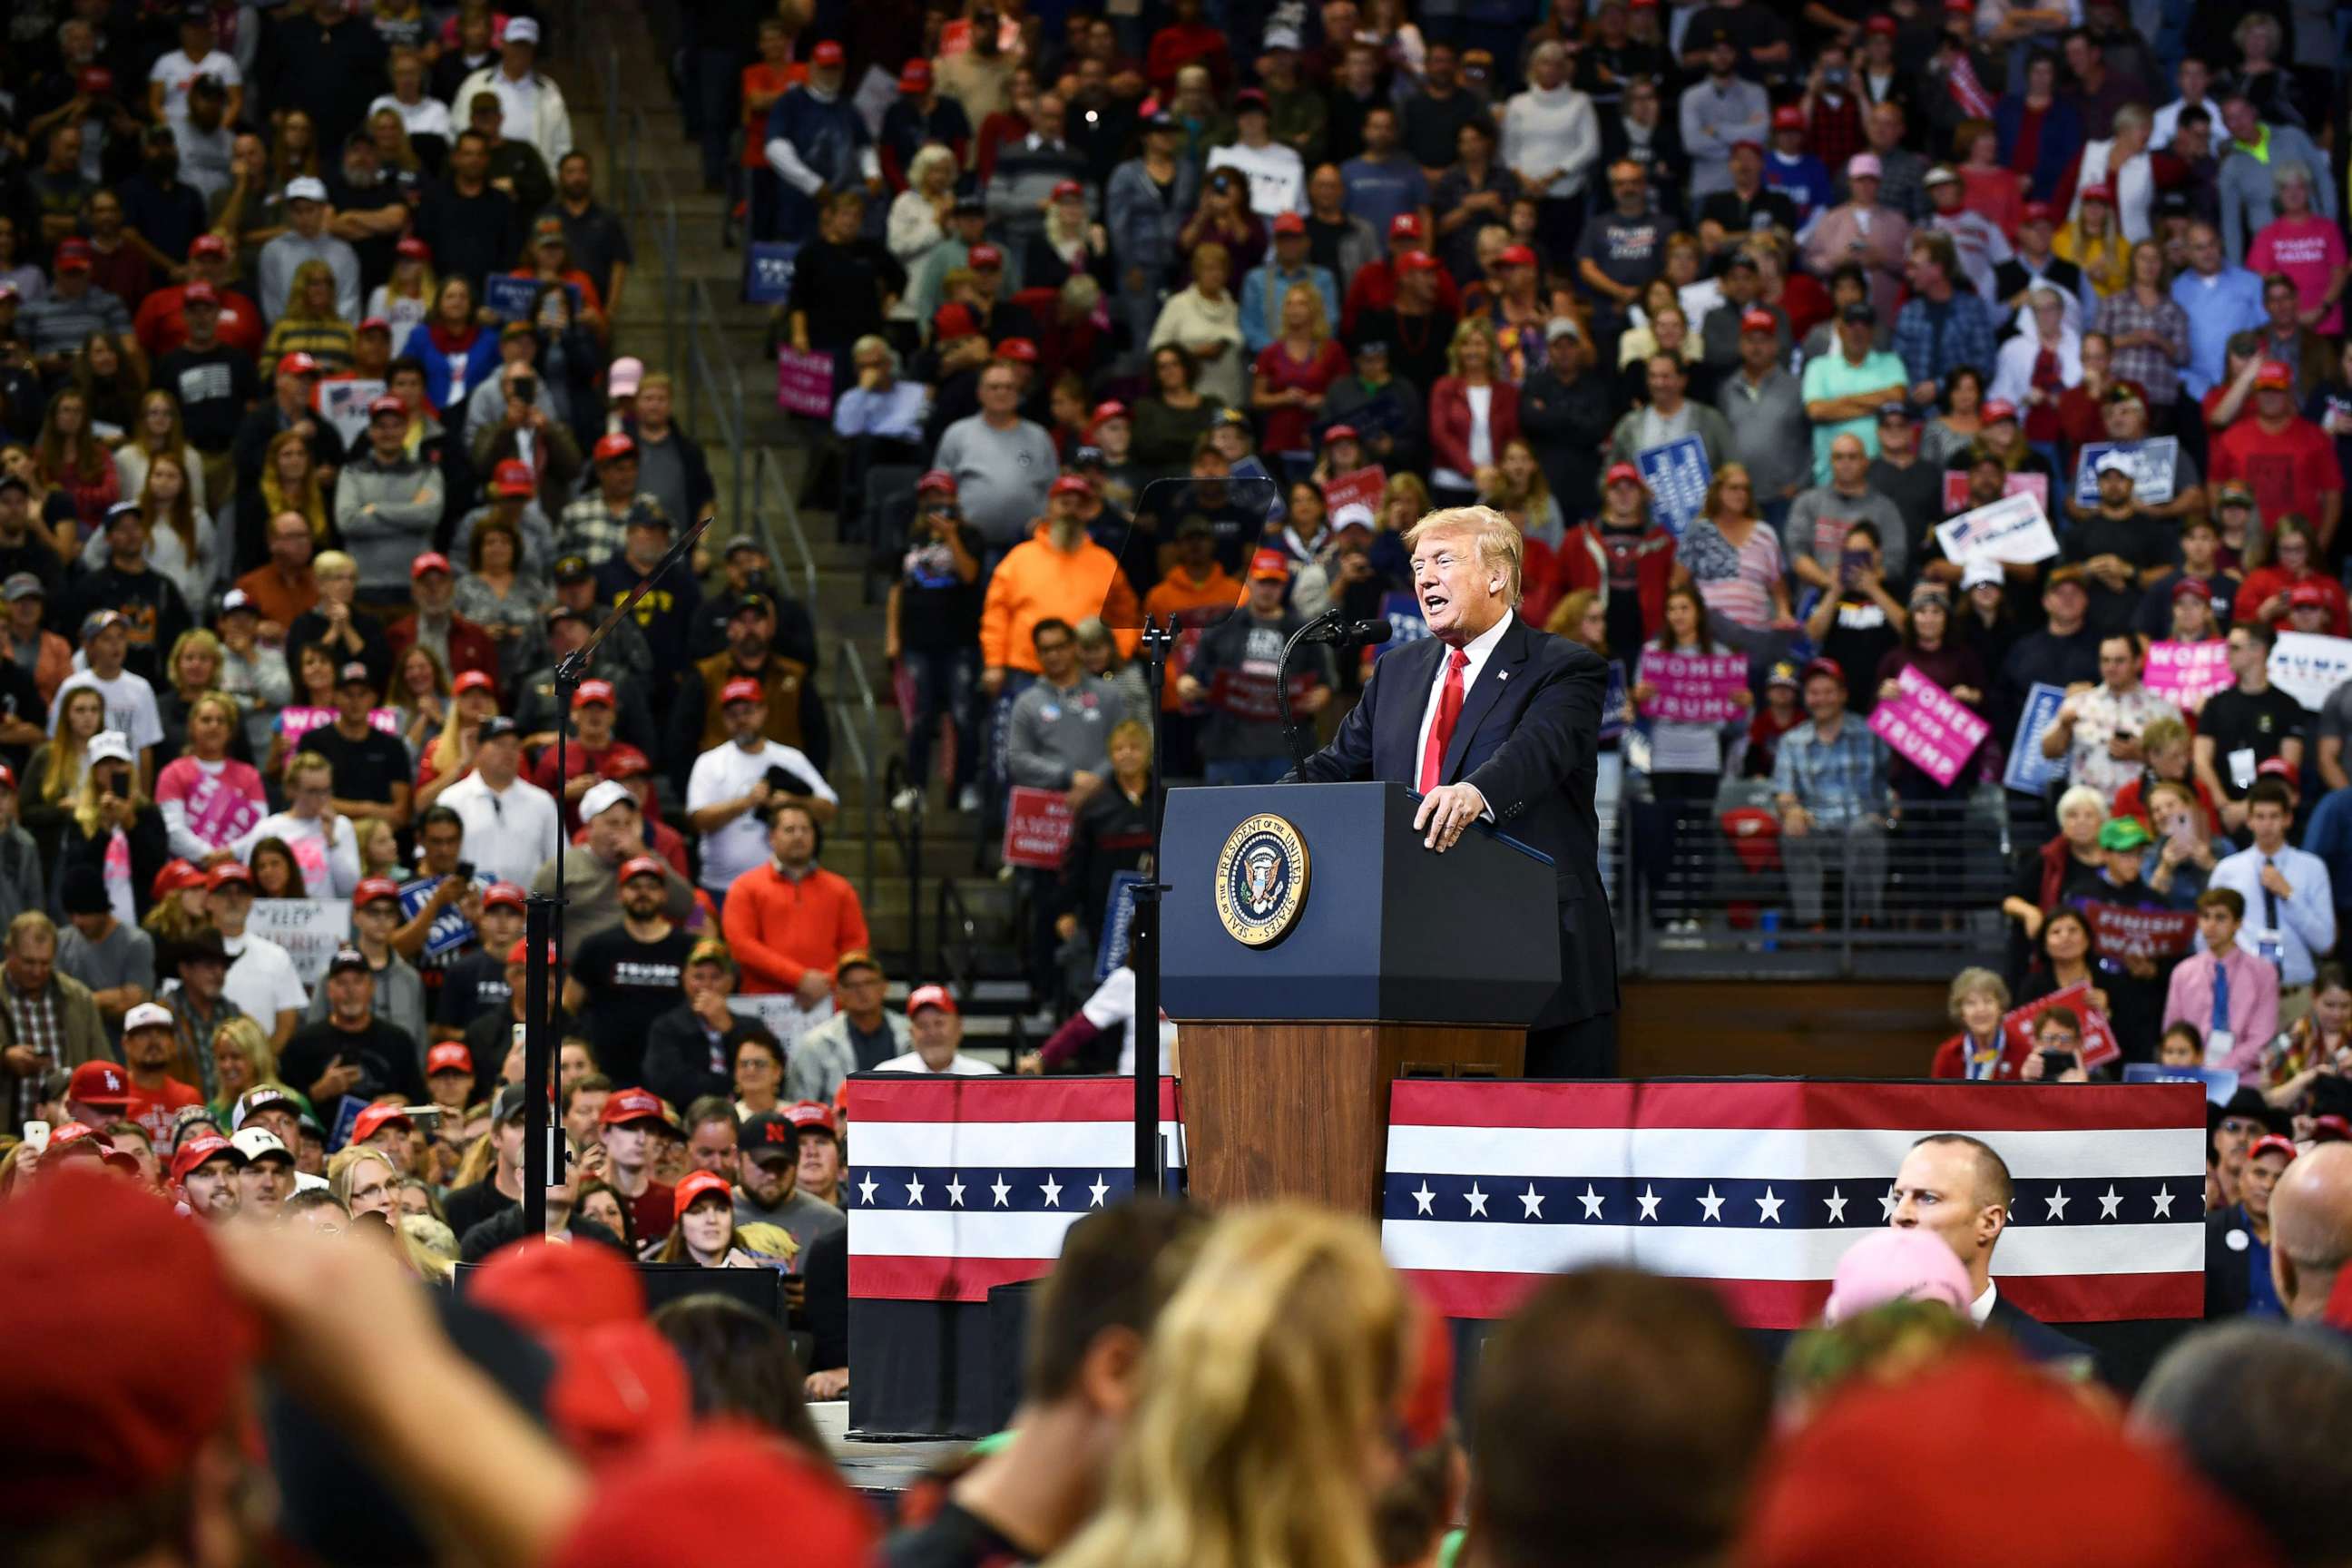 PHOTO: President Donald Trump speaks during a rally in Council Bluffs, Iowa, Oct. 9, 2018.